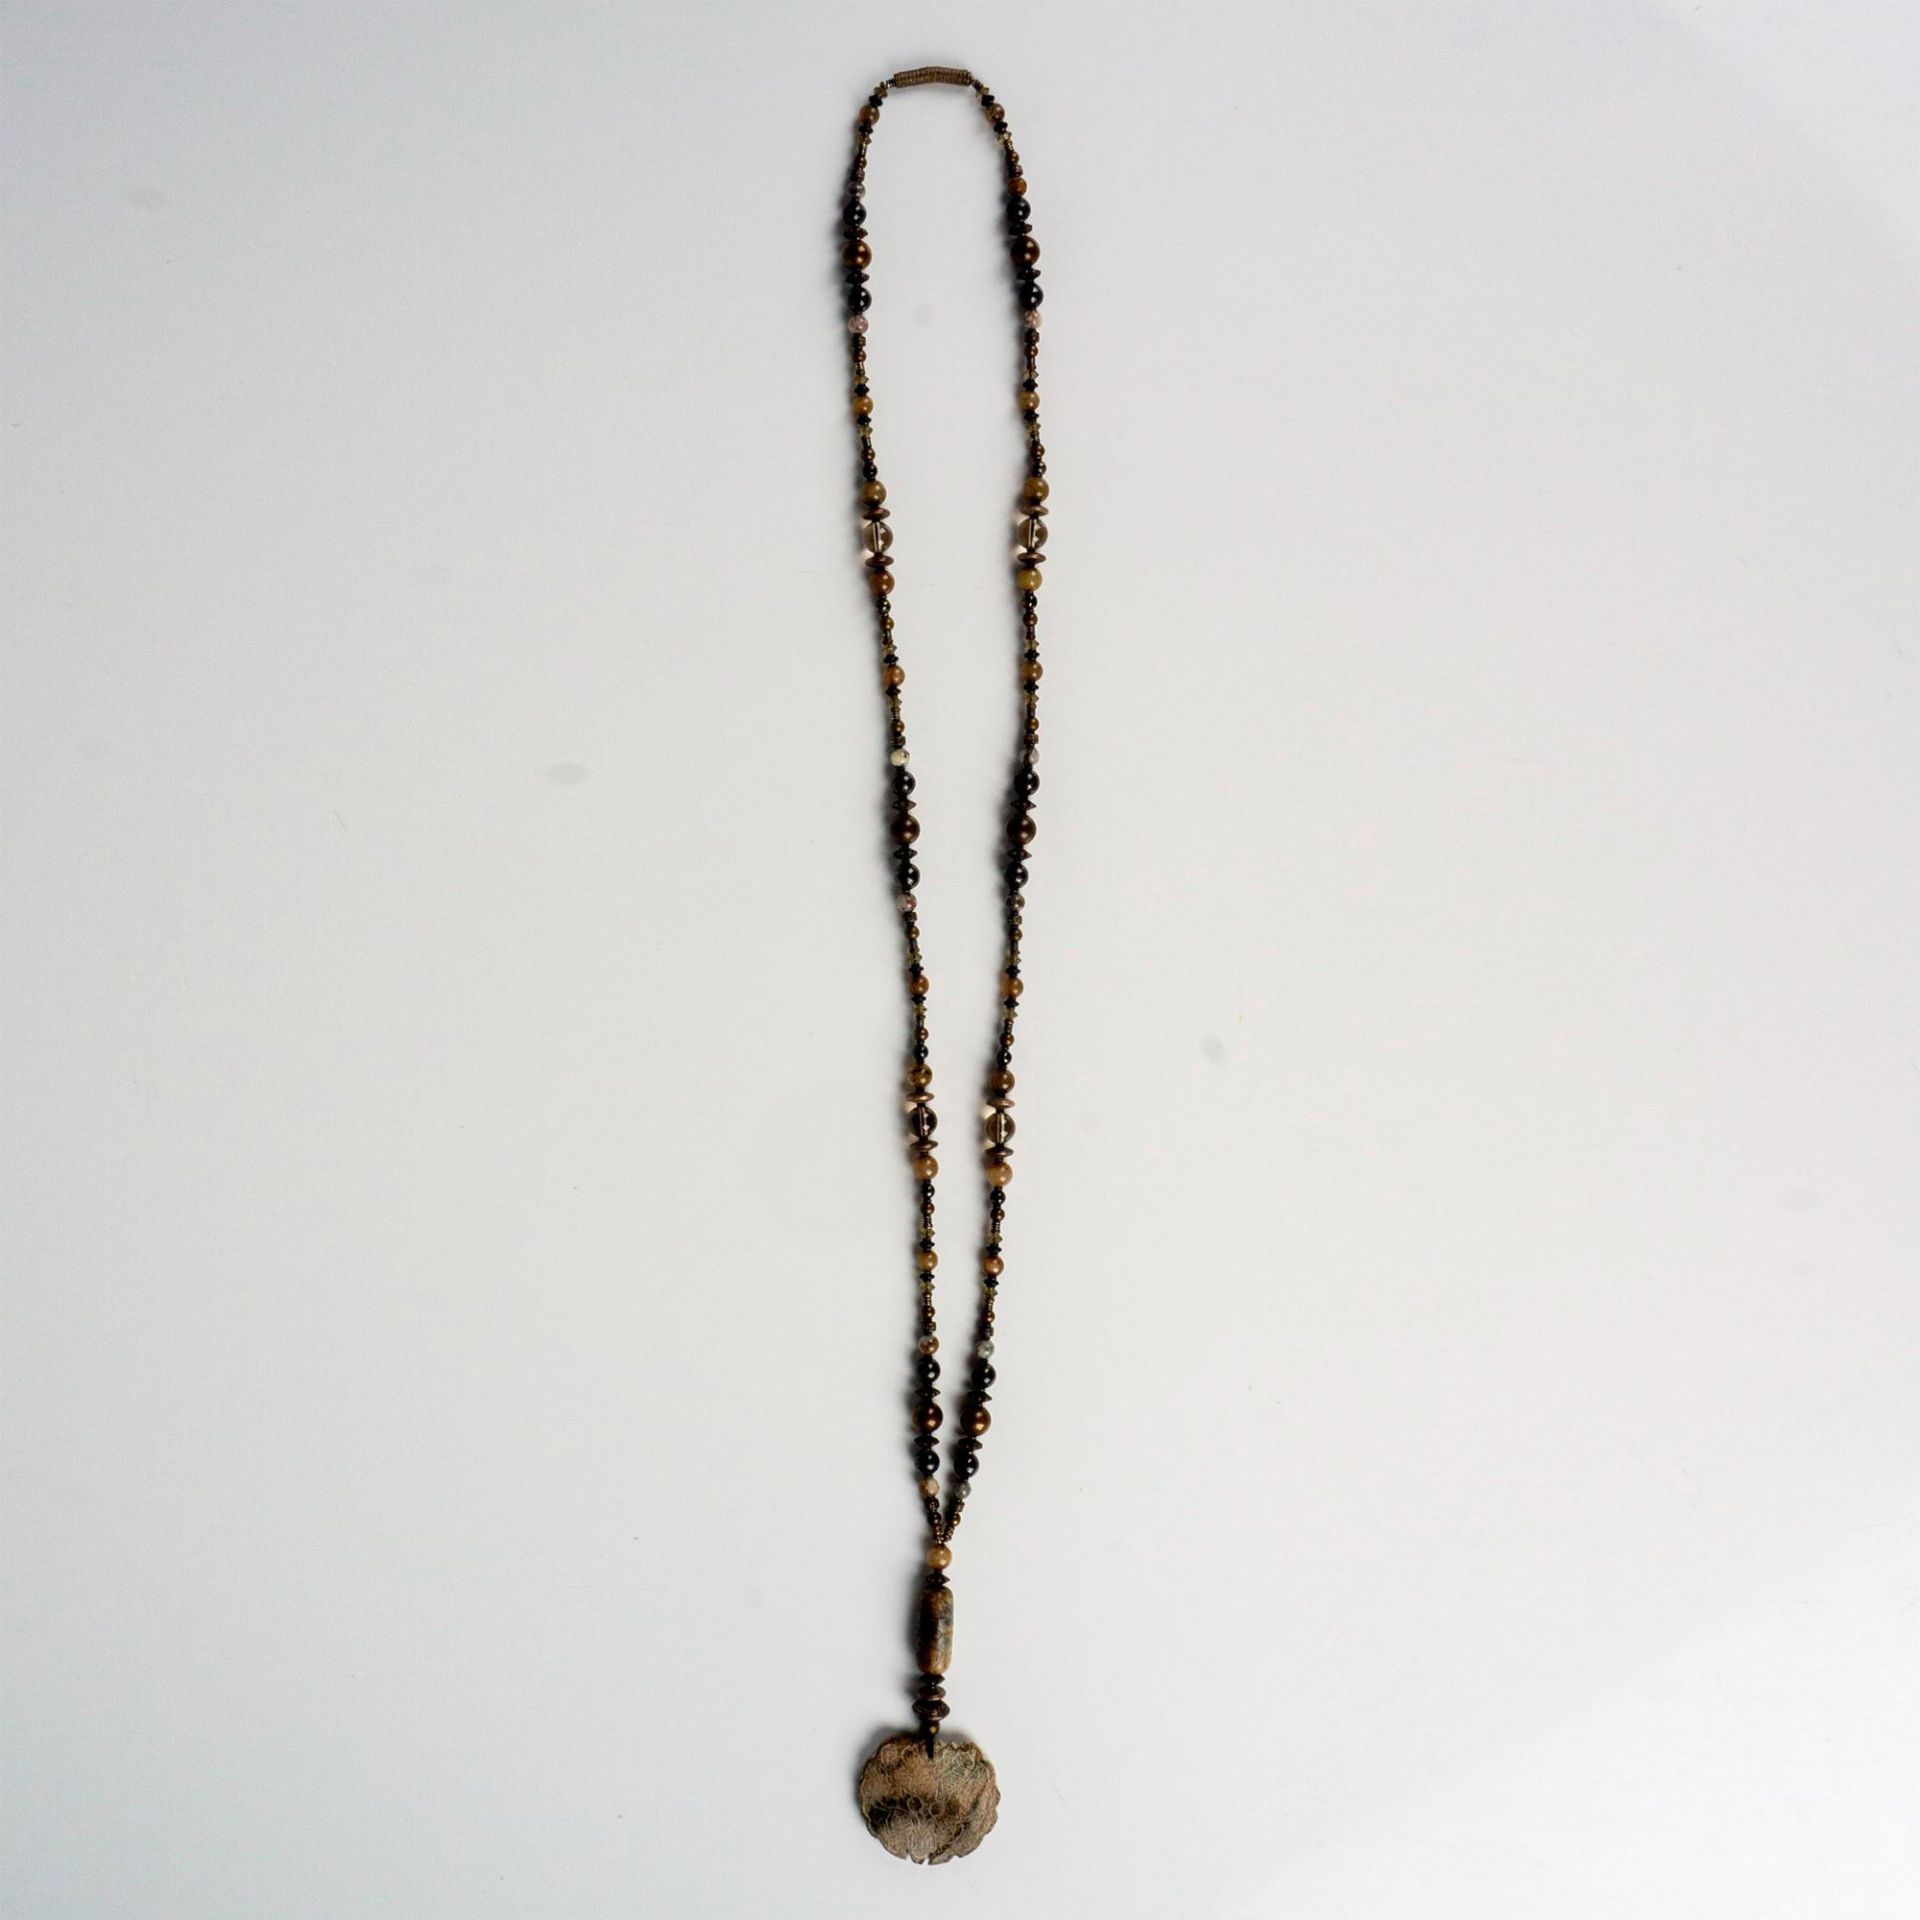 Vintage Tribal Beaded Wrap Necklace with Carved Pendant